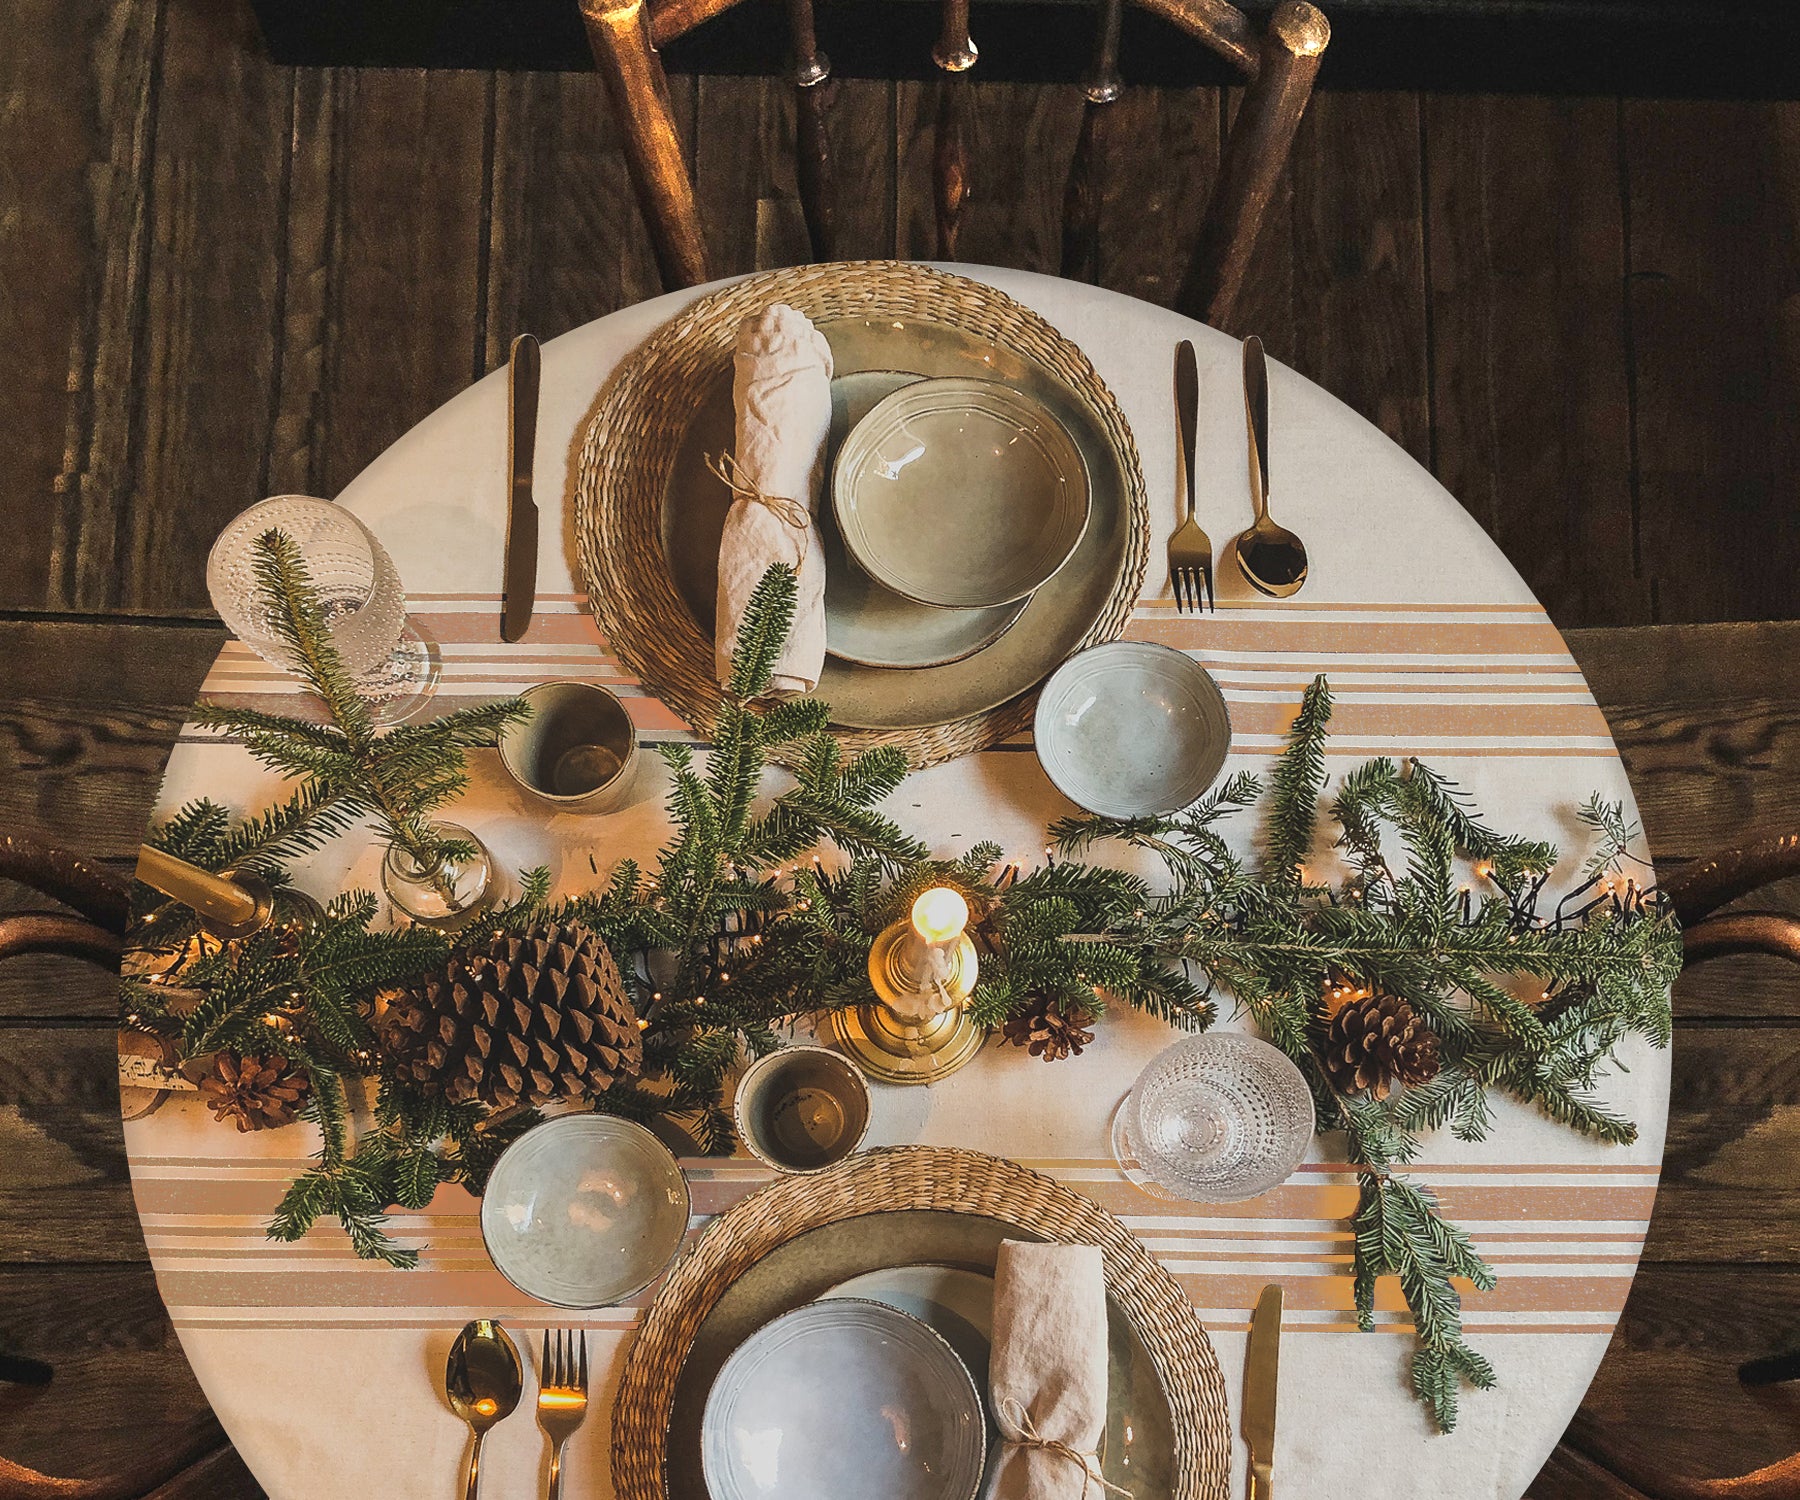 Table setup with round outdoor tablecloth and pine cone decor